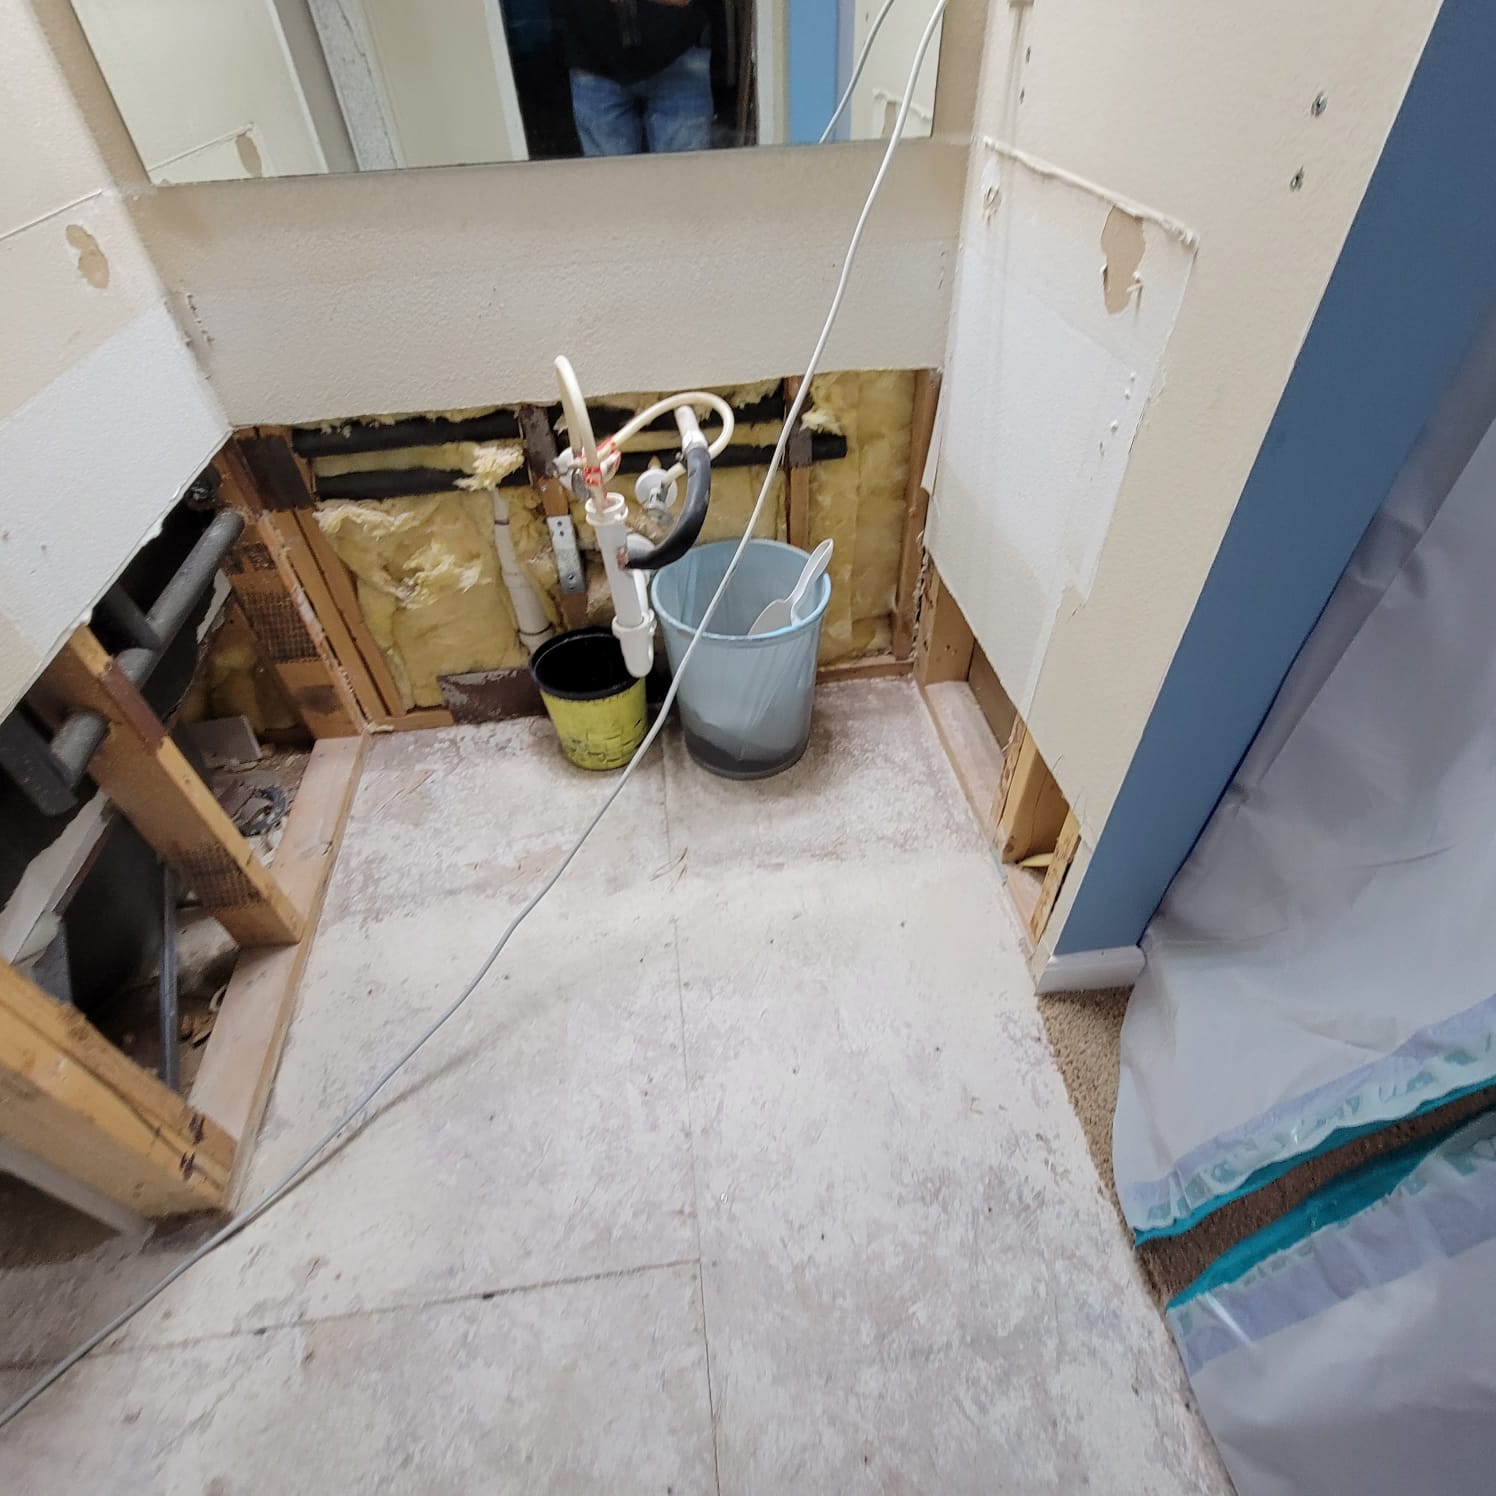 AC drainage leak that flooded the upstairs bathroom and downstairs kitchen. We set up containments, ran dehumidifiers and used air scrubbers while we removed contaminated materials.